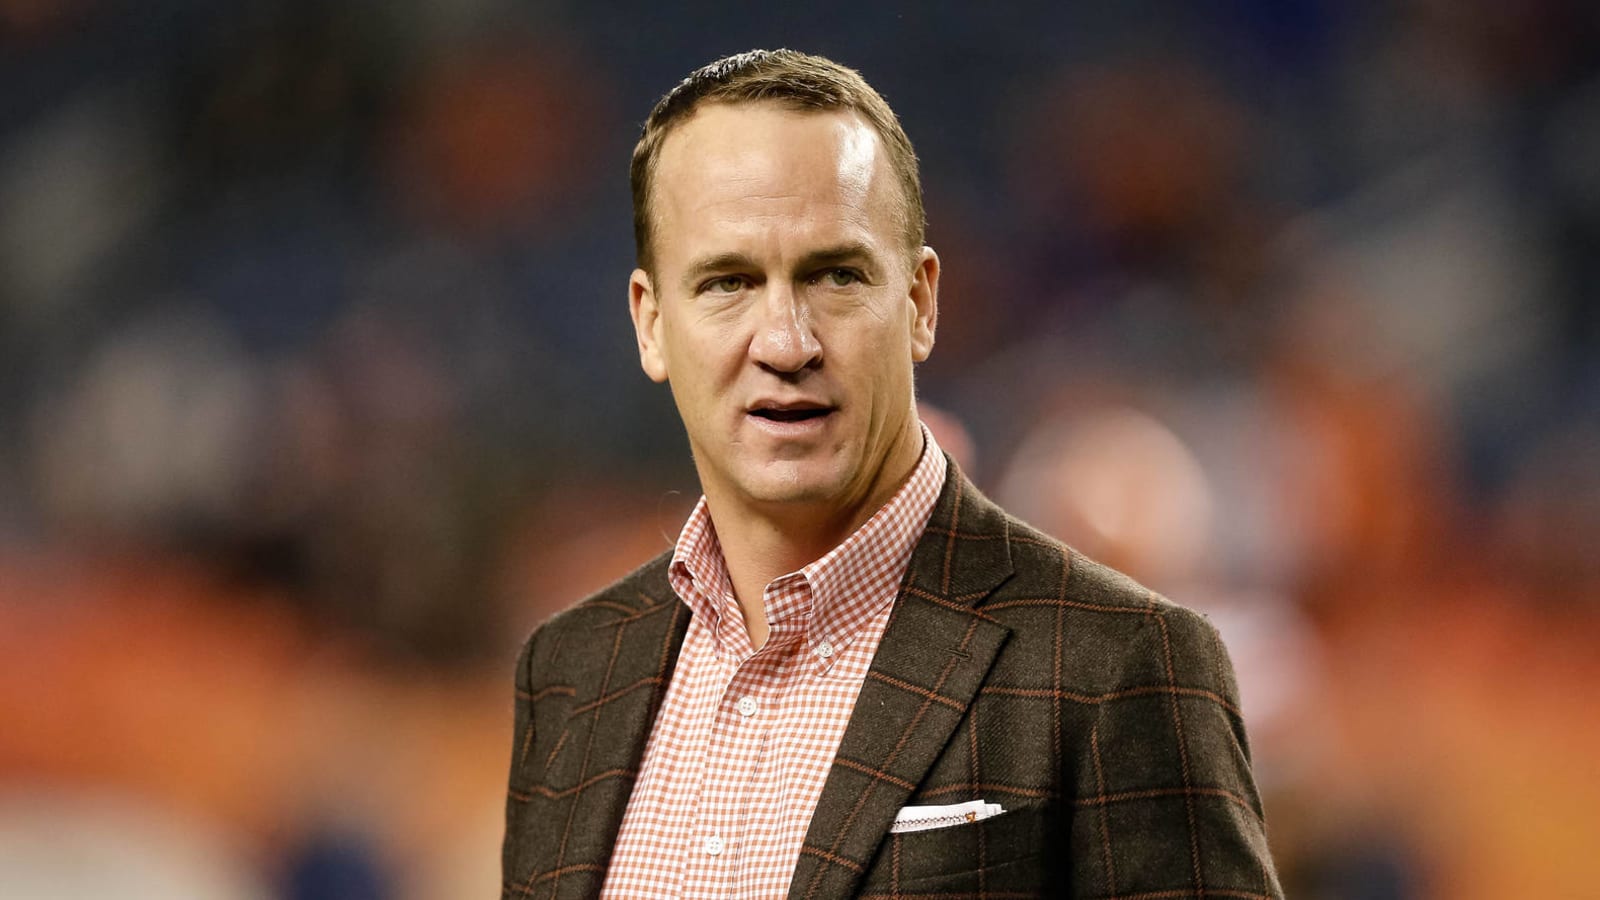 Peyton Manning is in demand, but would he be good fit with Jets?